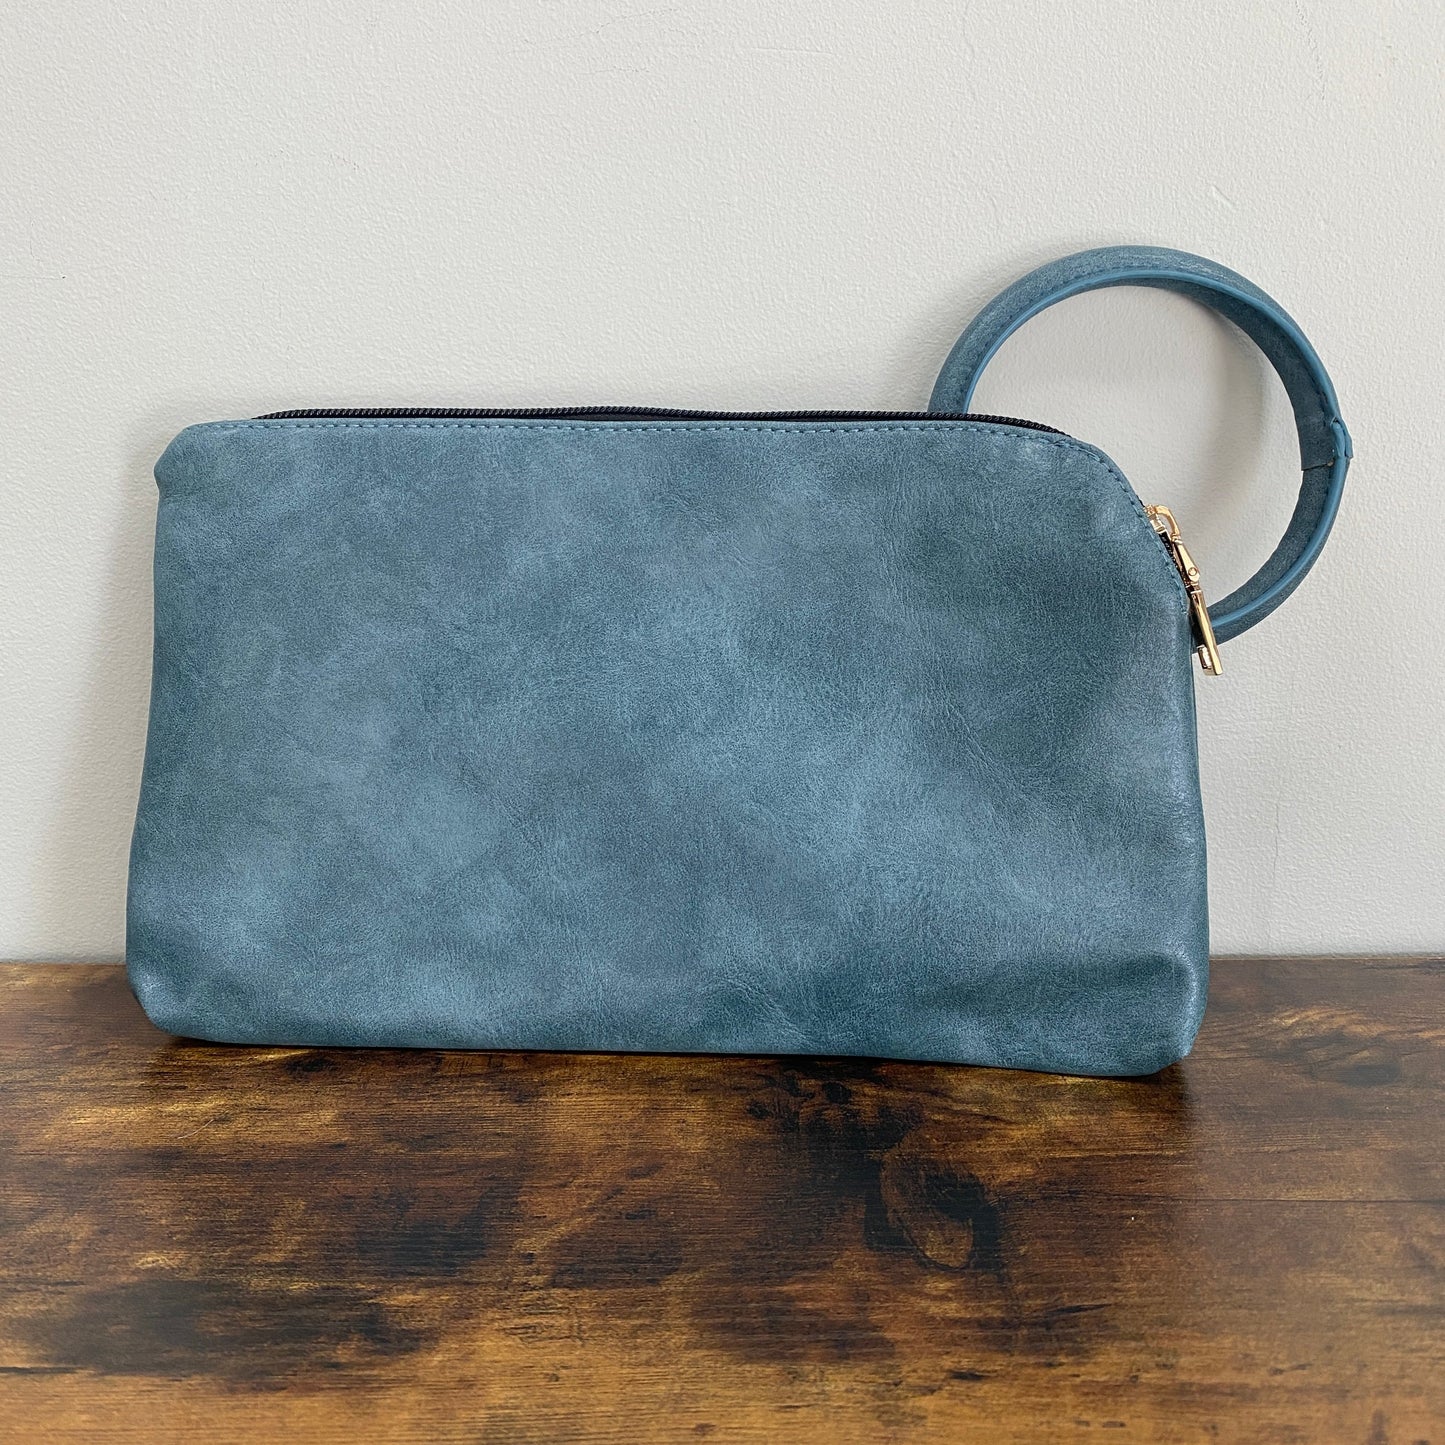 Luna Clutch - Faux Leather with Wrist Loop